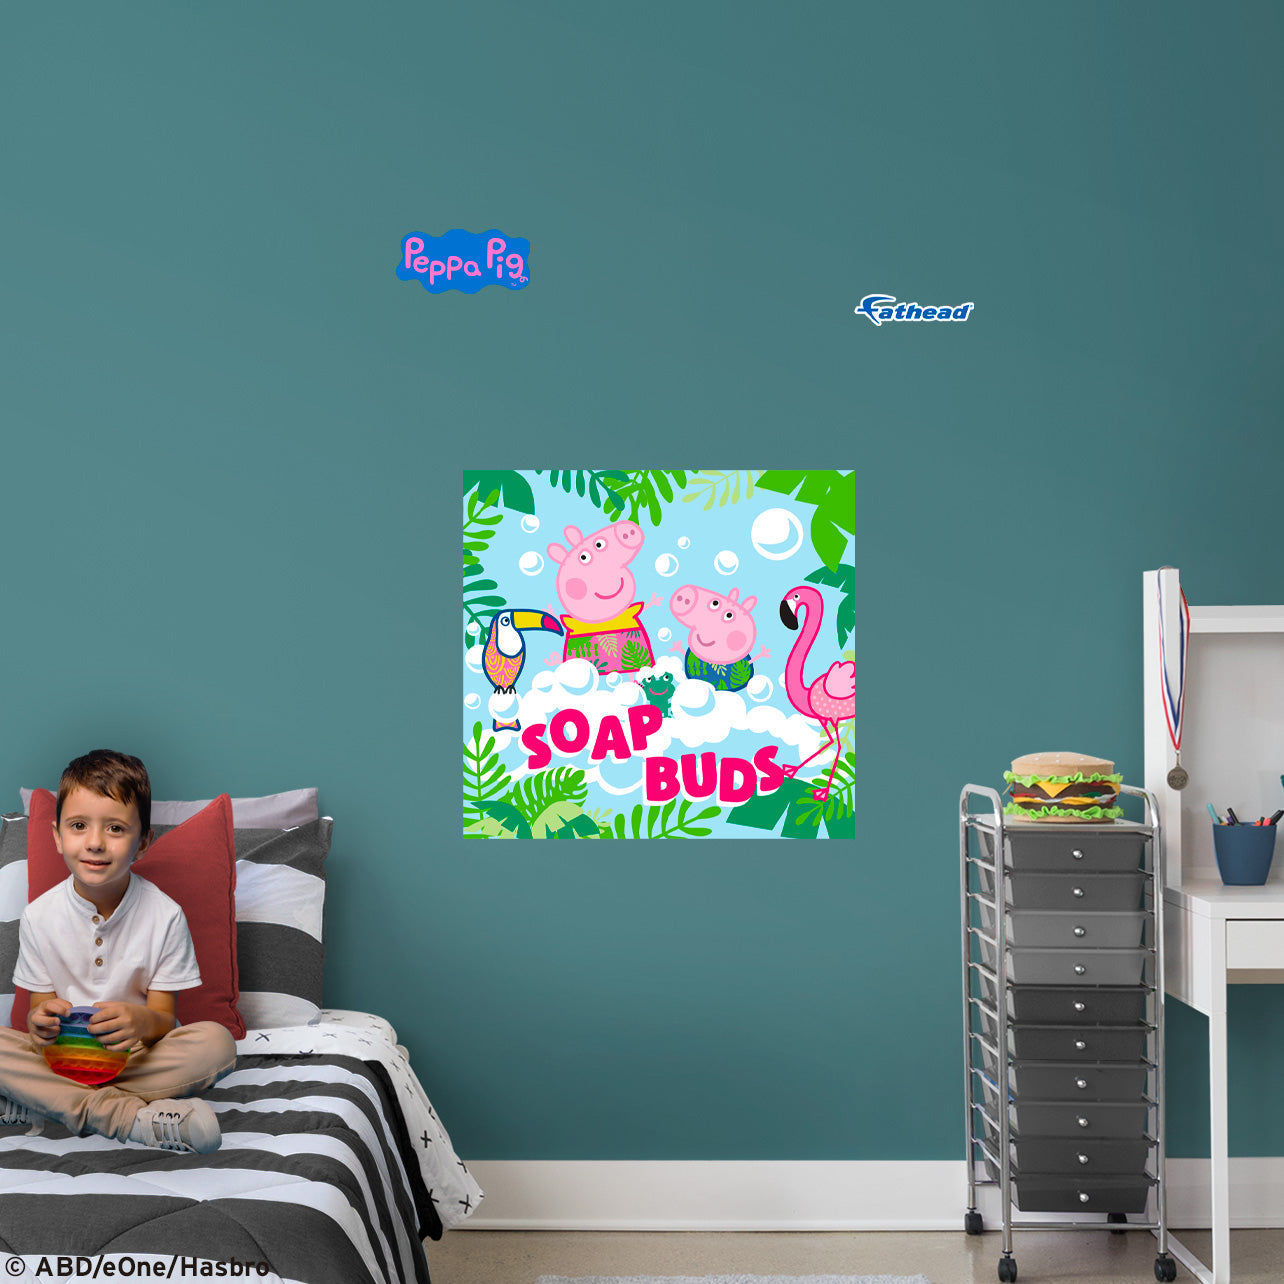 Peppa Pig: Soap Buds Poster - Officially Licensed Hasbro Removable Adhesive Decal